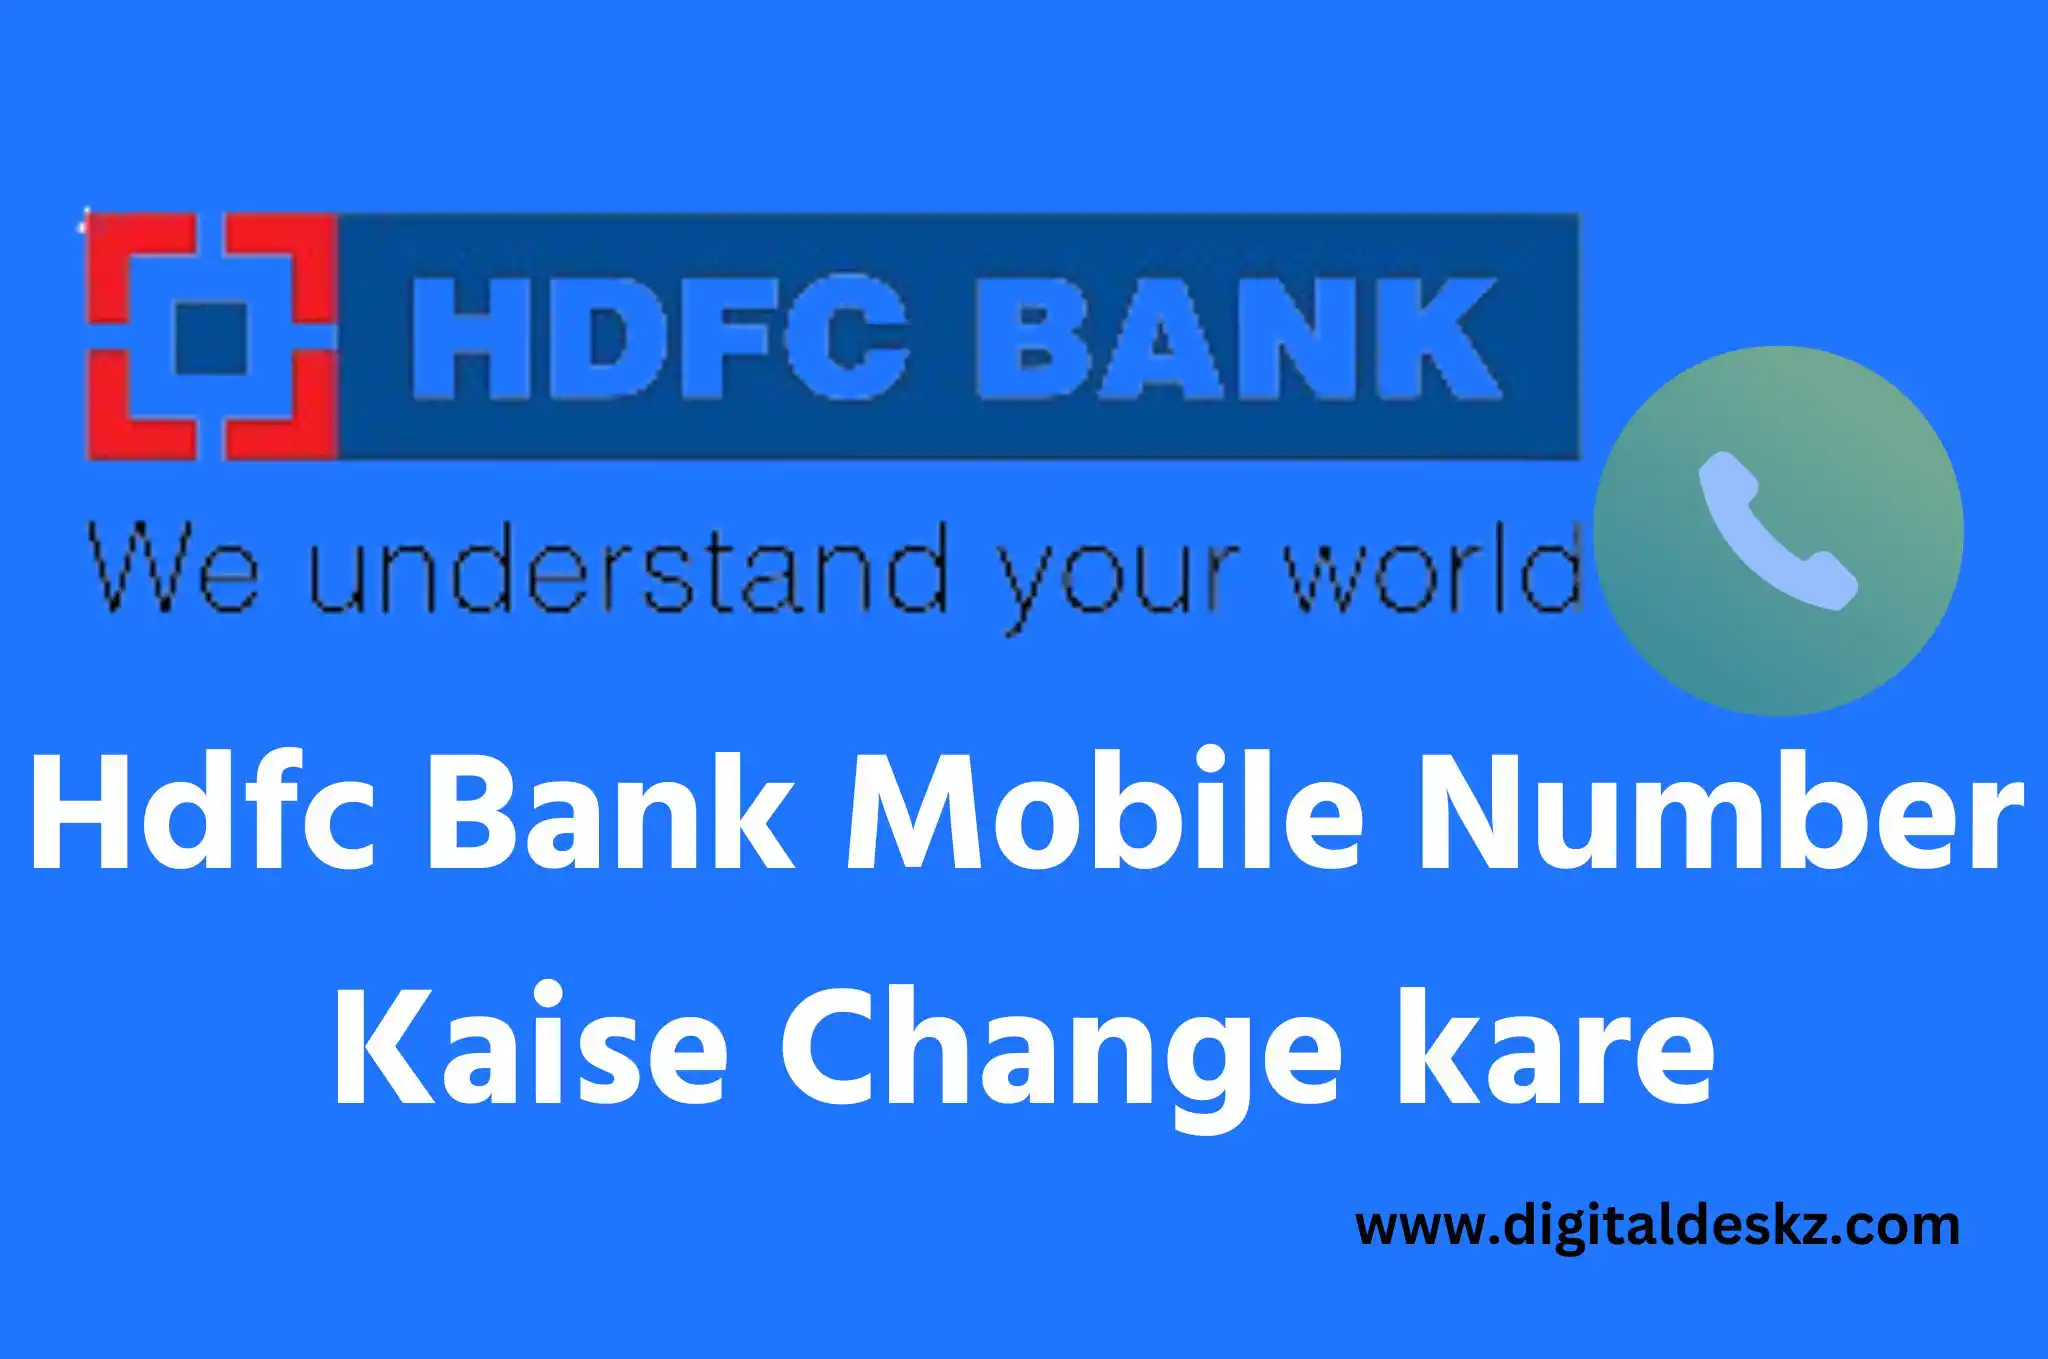 Hdfc bank mobile number kaise change kare